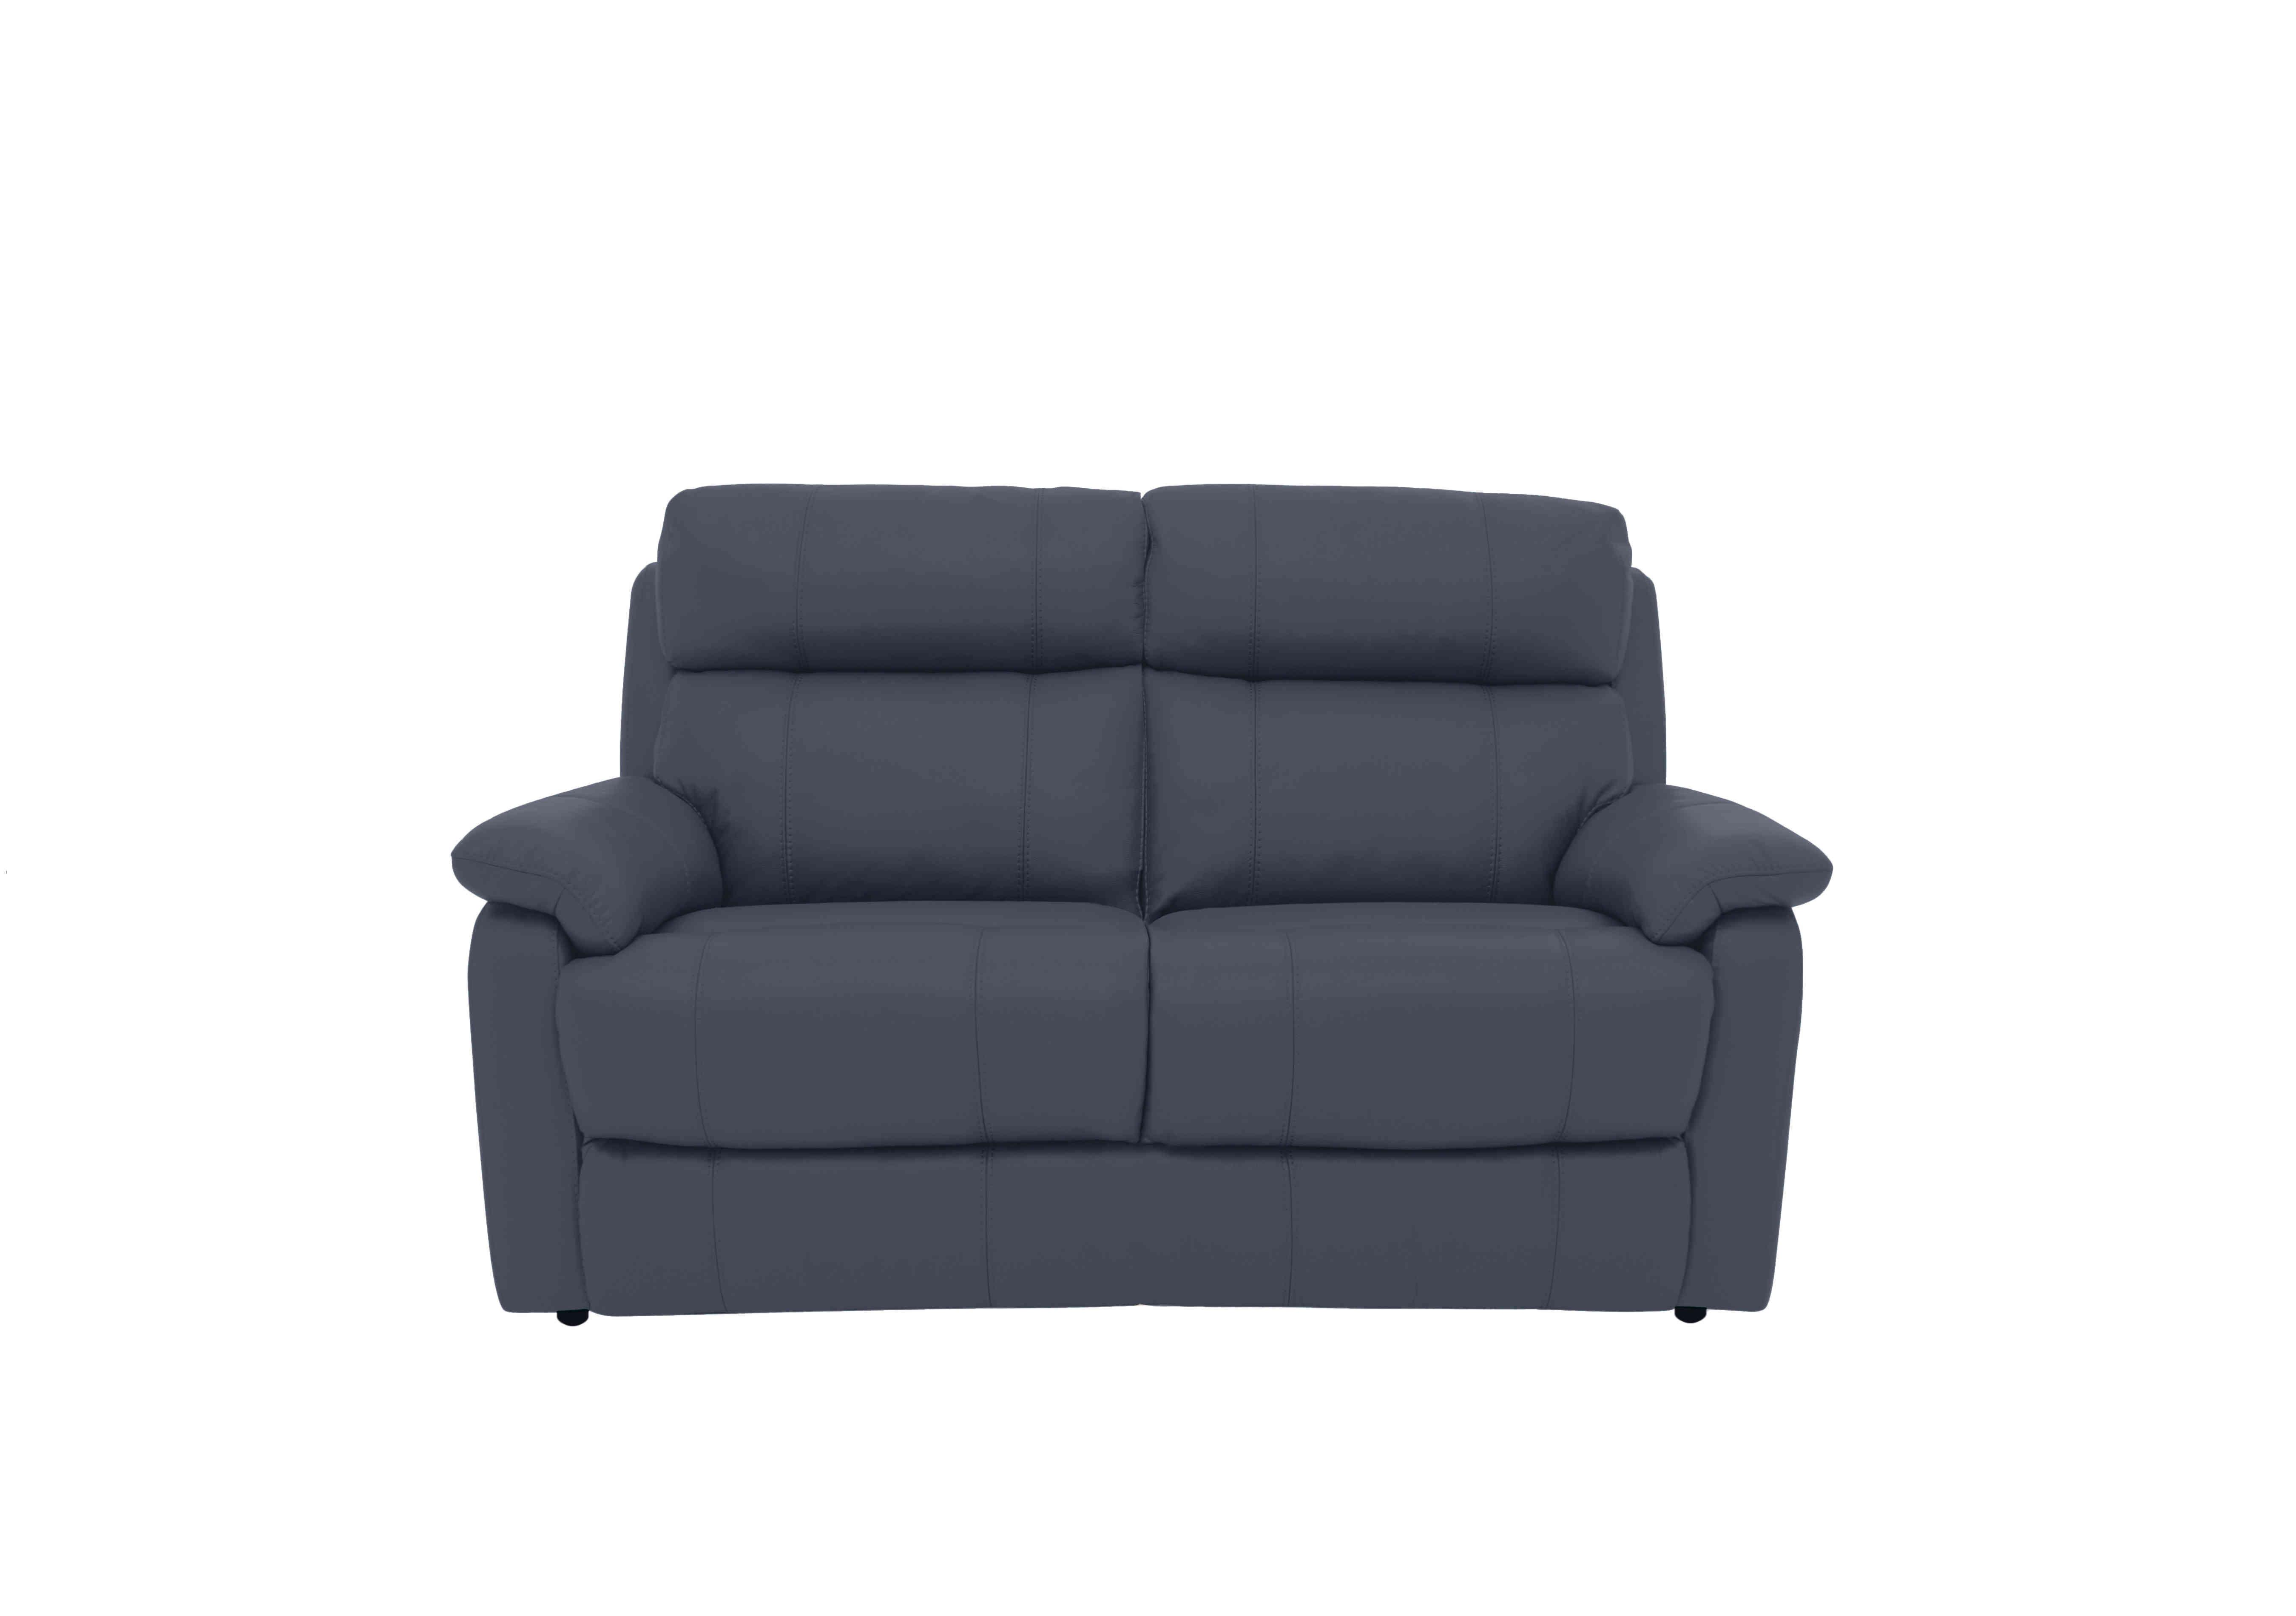 Relax Station Komodo 2 Seater Leather Sofa in Bv-313e Ocean Blue on Furniture Village